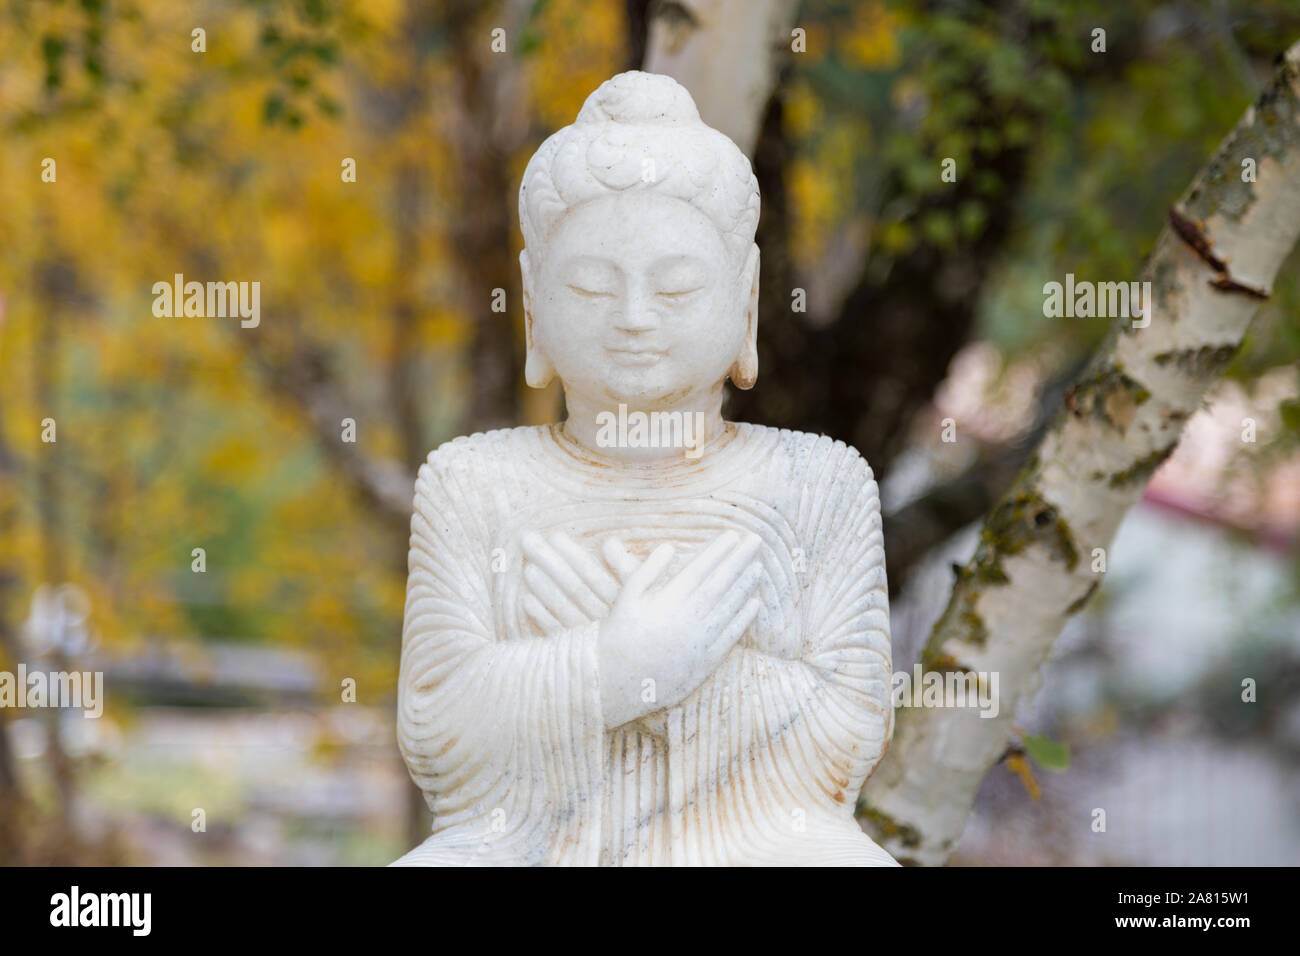 Statue of Buddha with autumn fall colors in the background Stock Photo